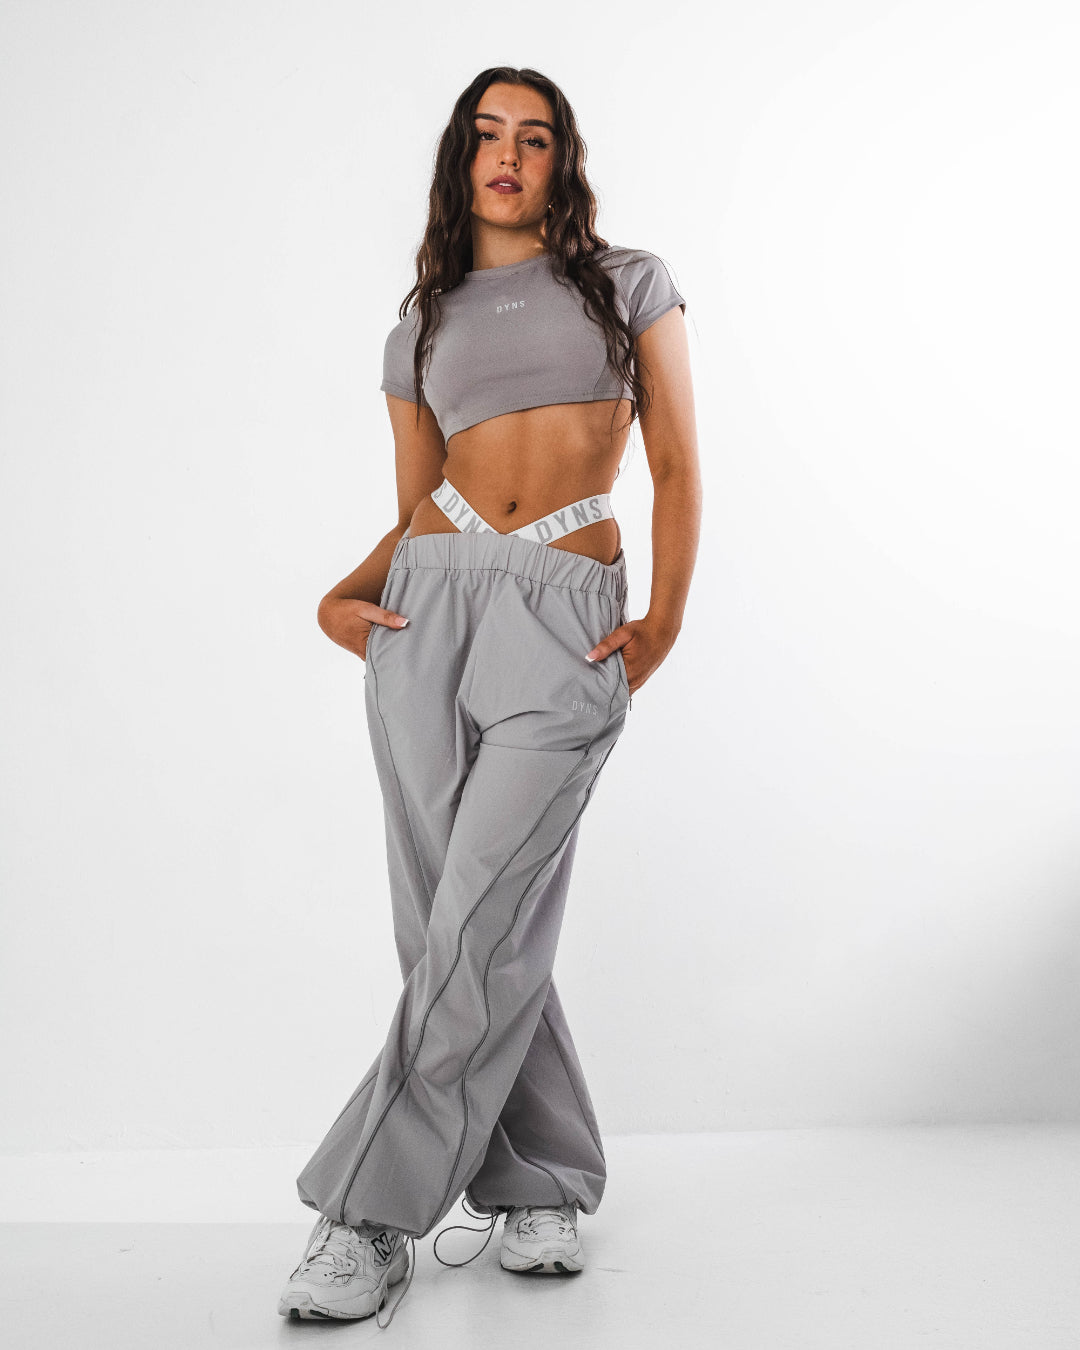 Elevate - WITH Waistband Cargos - Grey